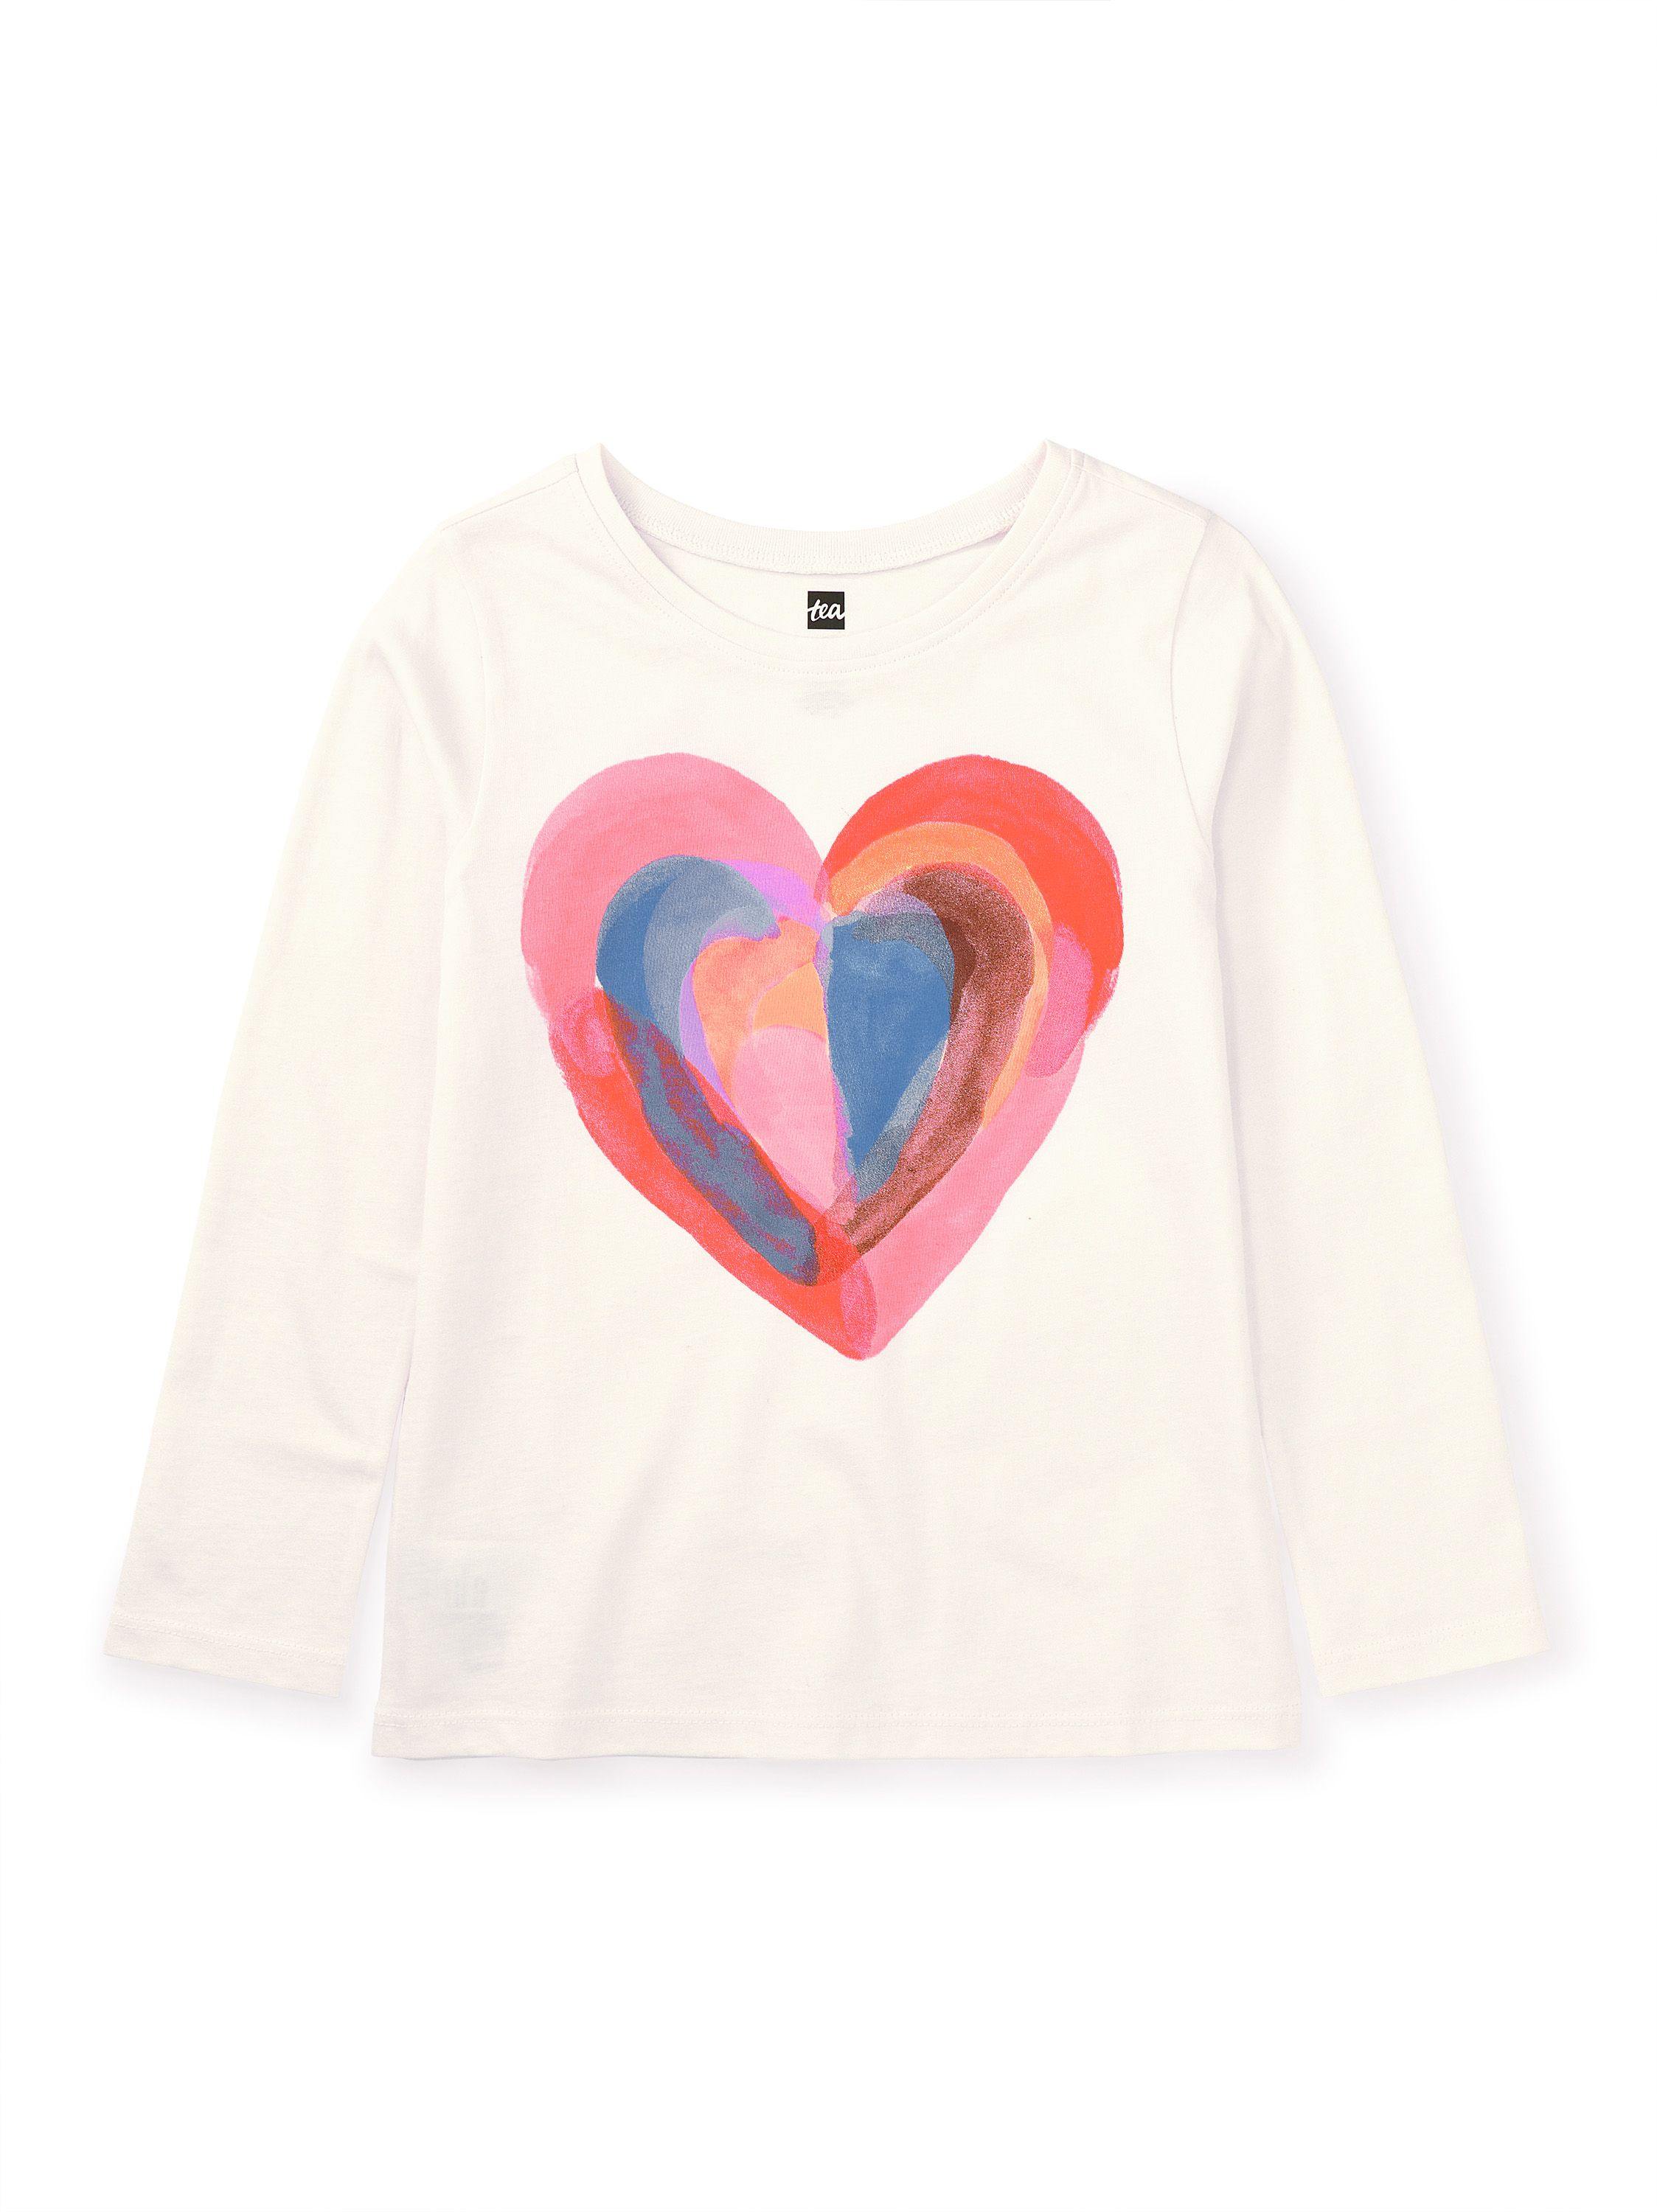 Painted Heart Graphic Tee | Tea Collection